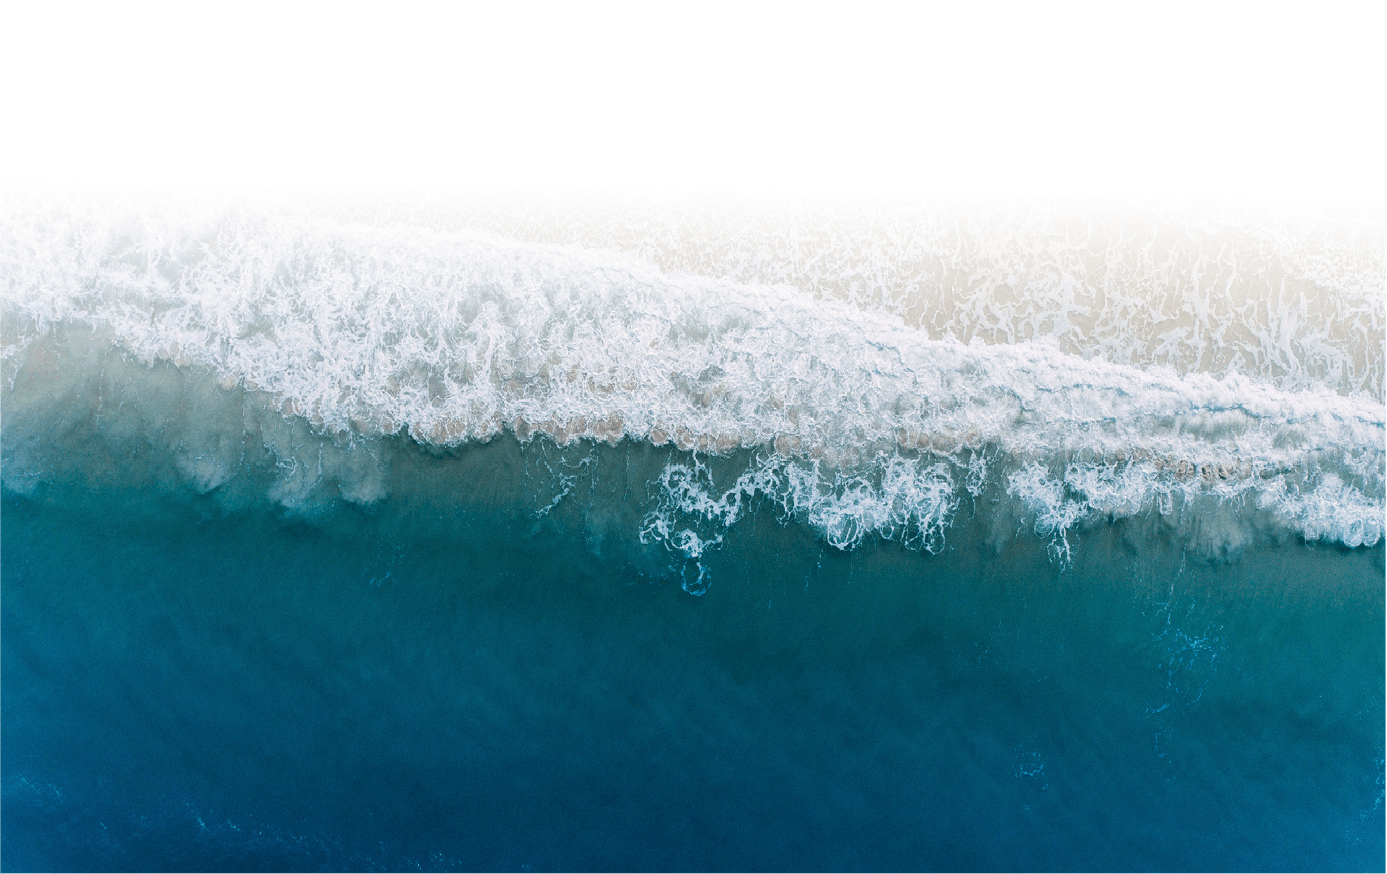 Aerial view of waves on a beach